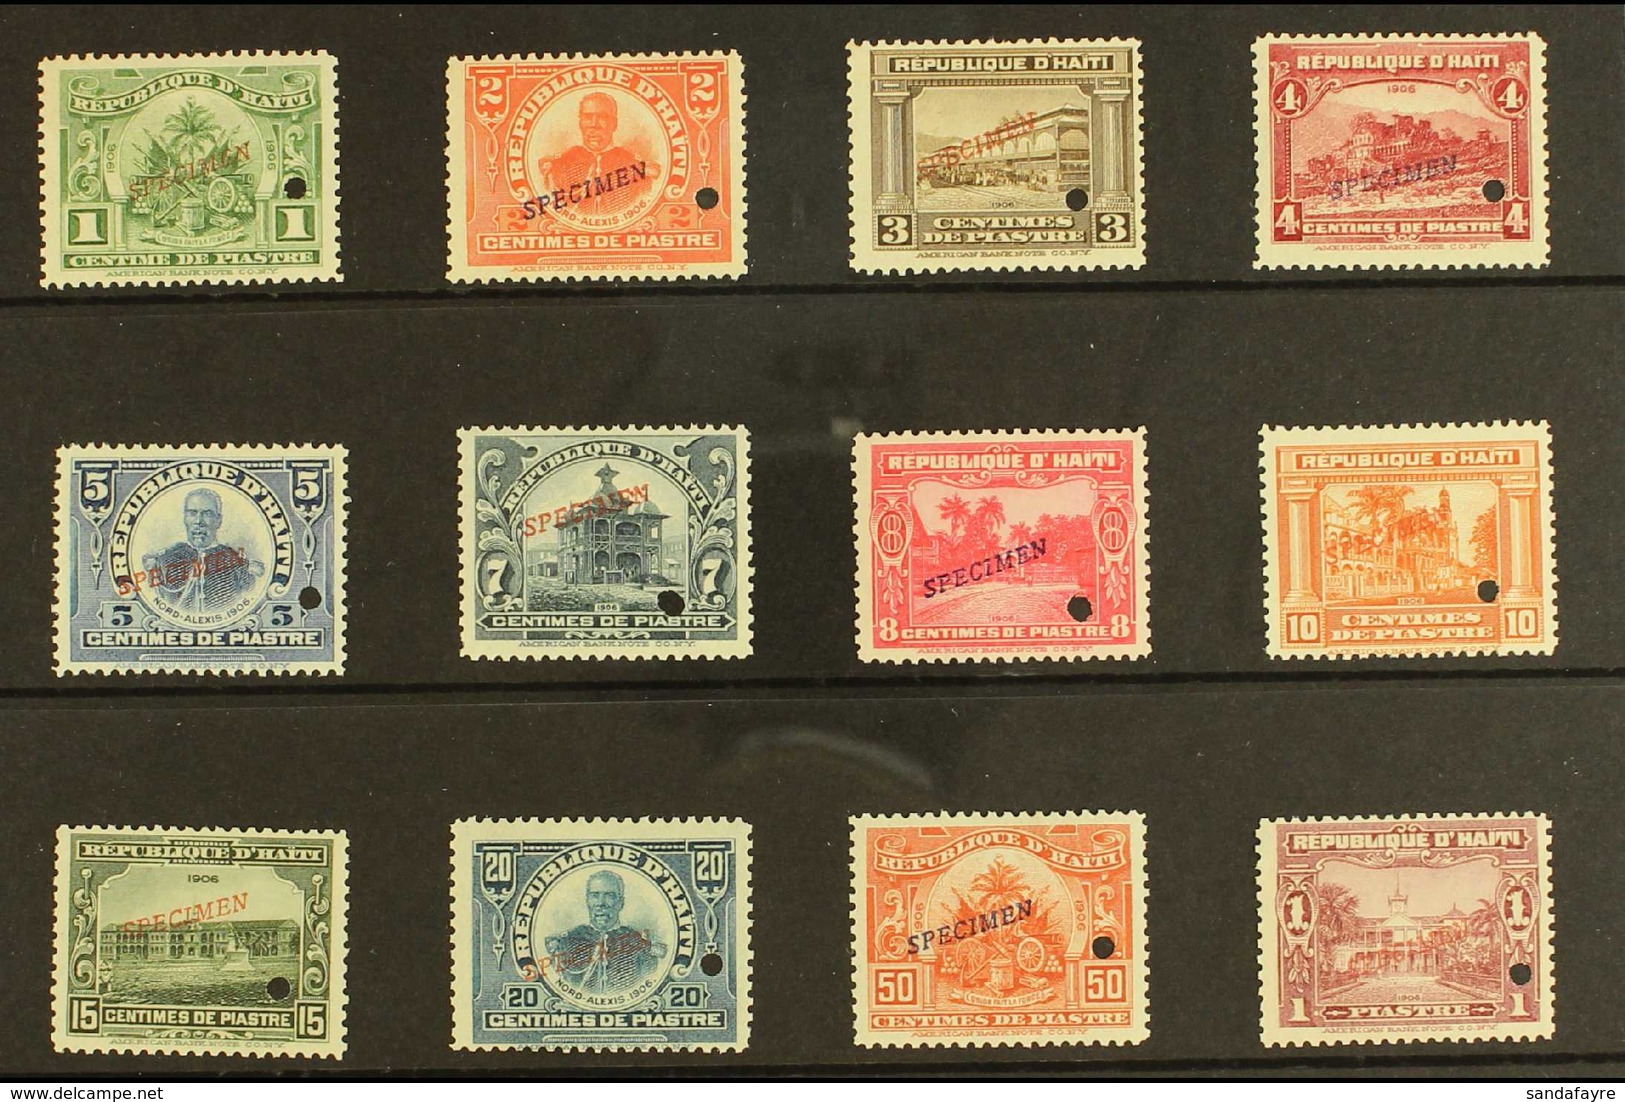 1906 For Foreign Use Definitive Set (SG 137/39 & 141/49) Overprinted "SPECIMEN" And With Security Punch Hole, Never Hing - Haiti